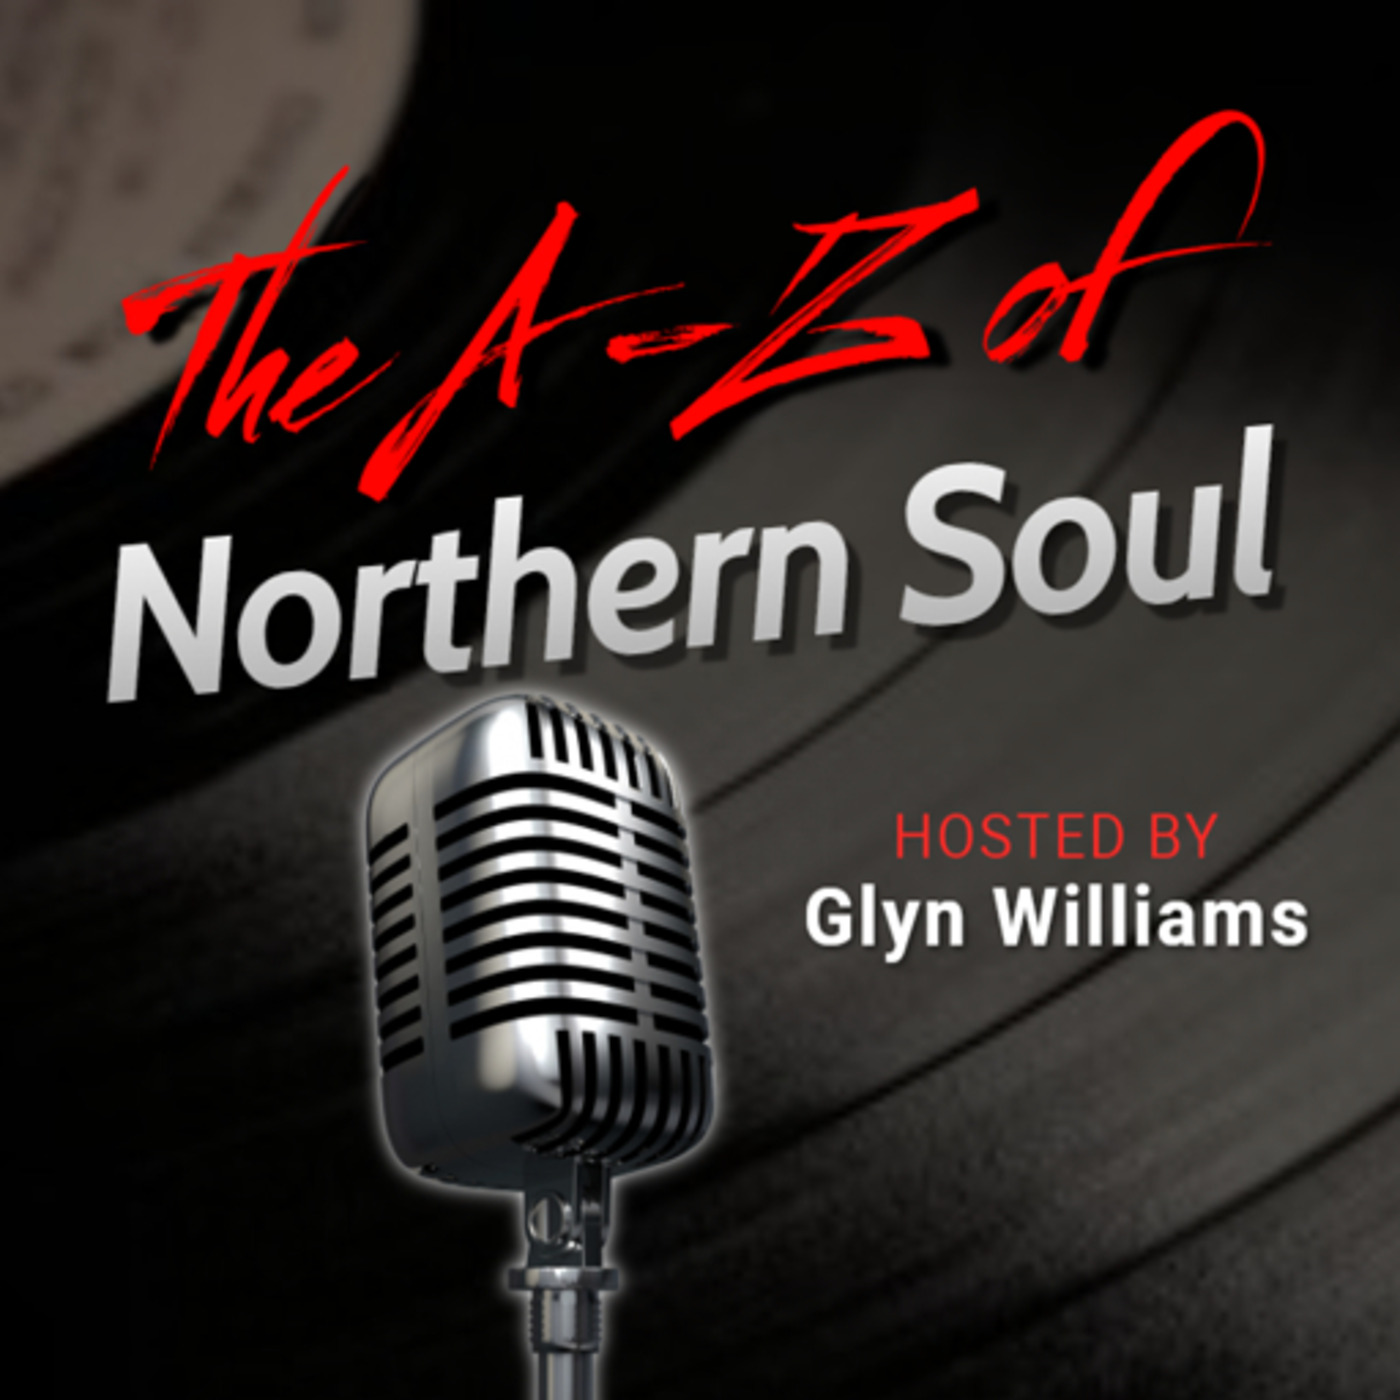 The A-Z of Northern Soul E067